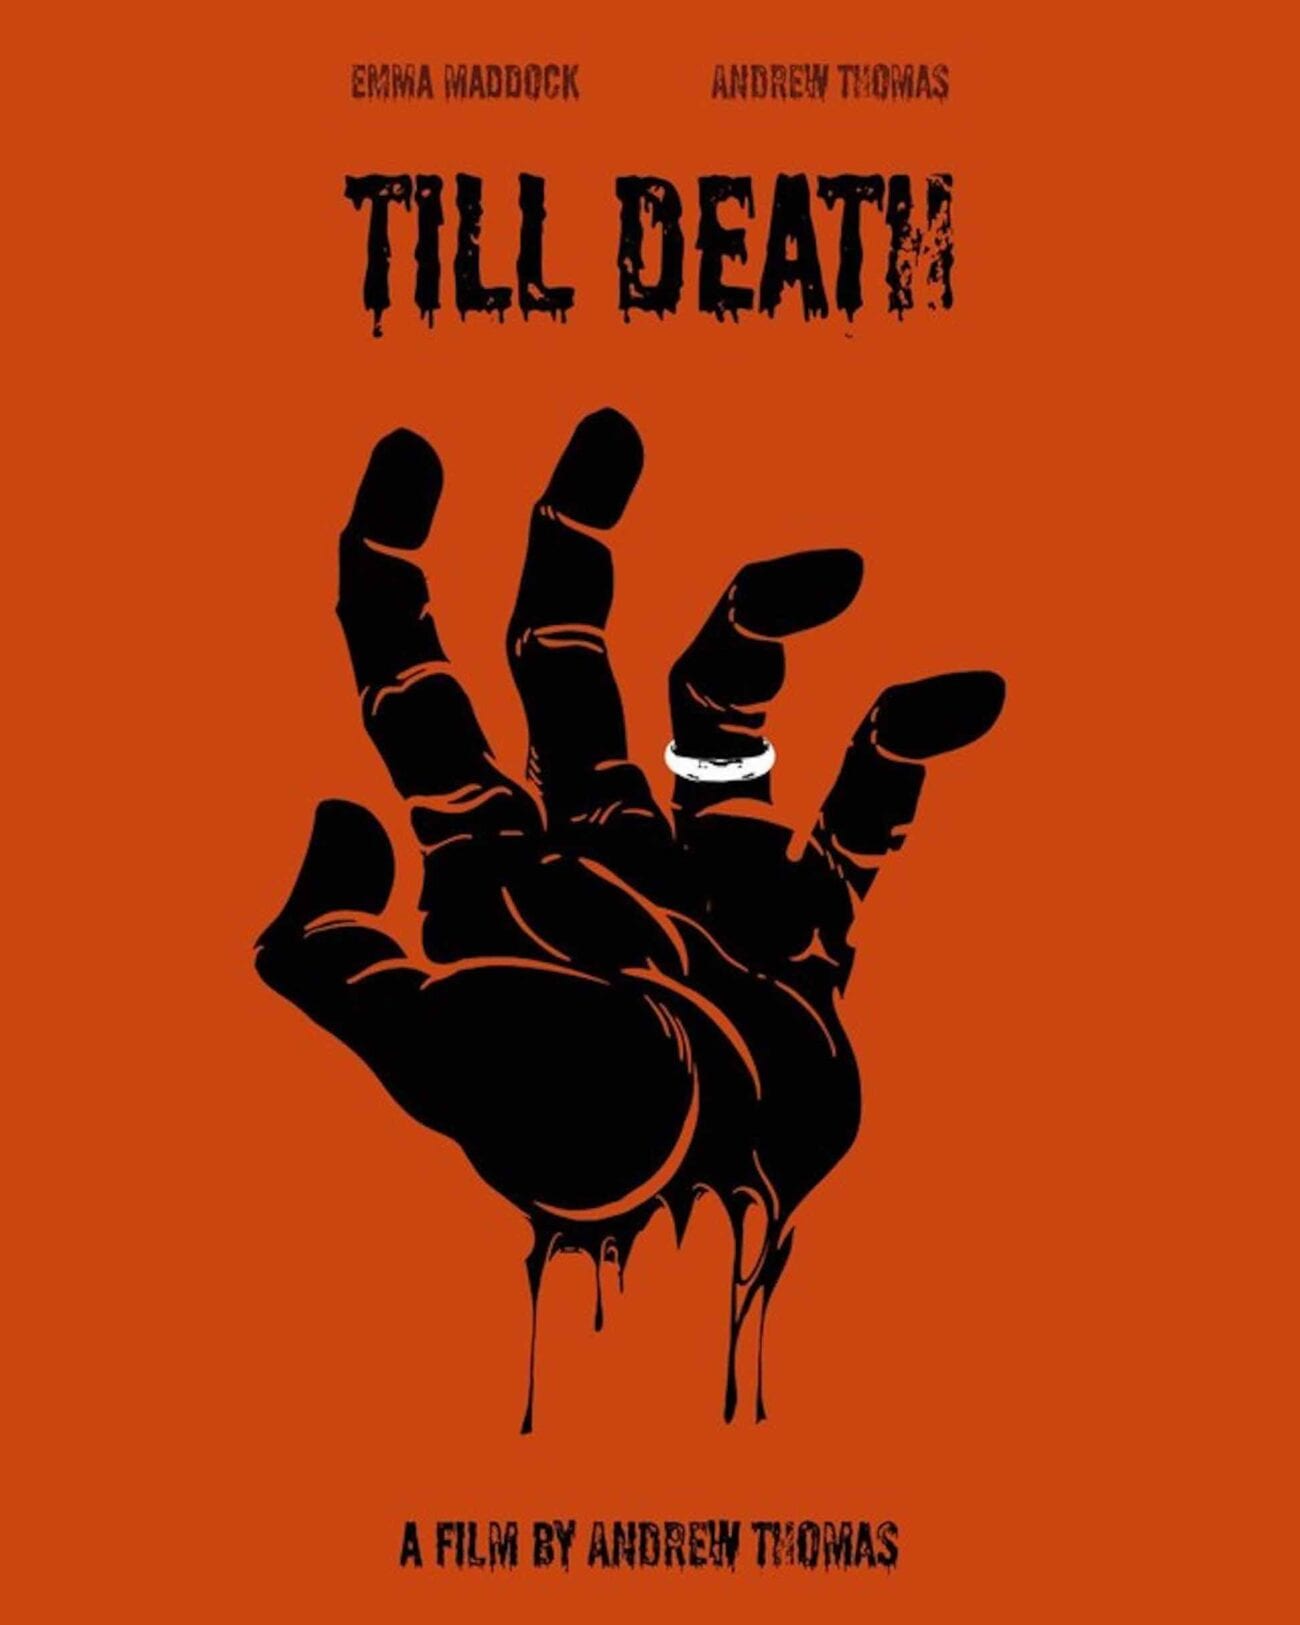 'Till Death' is the latest project coming from filmmaker Andrew Thomas. Here's everything you need to know about 'Till Death'.